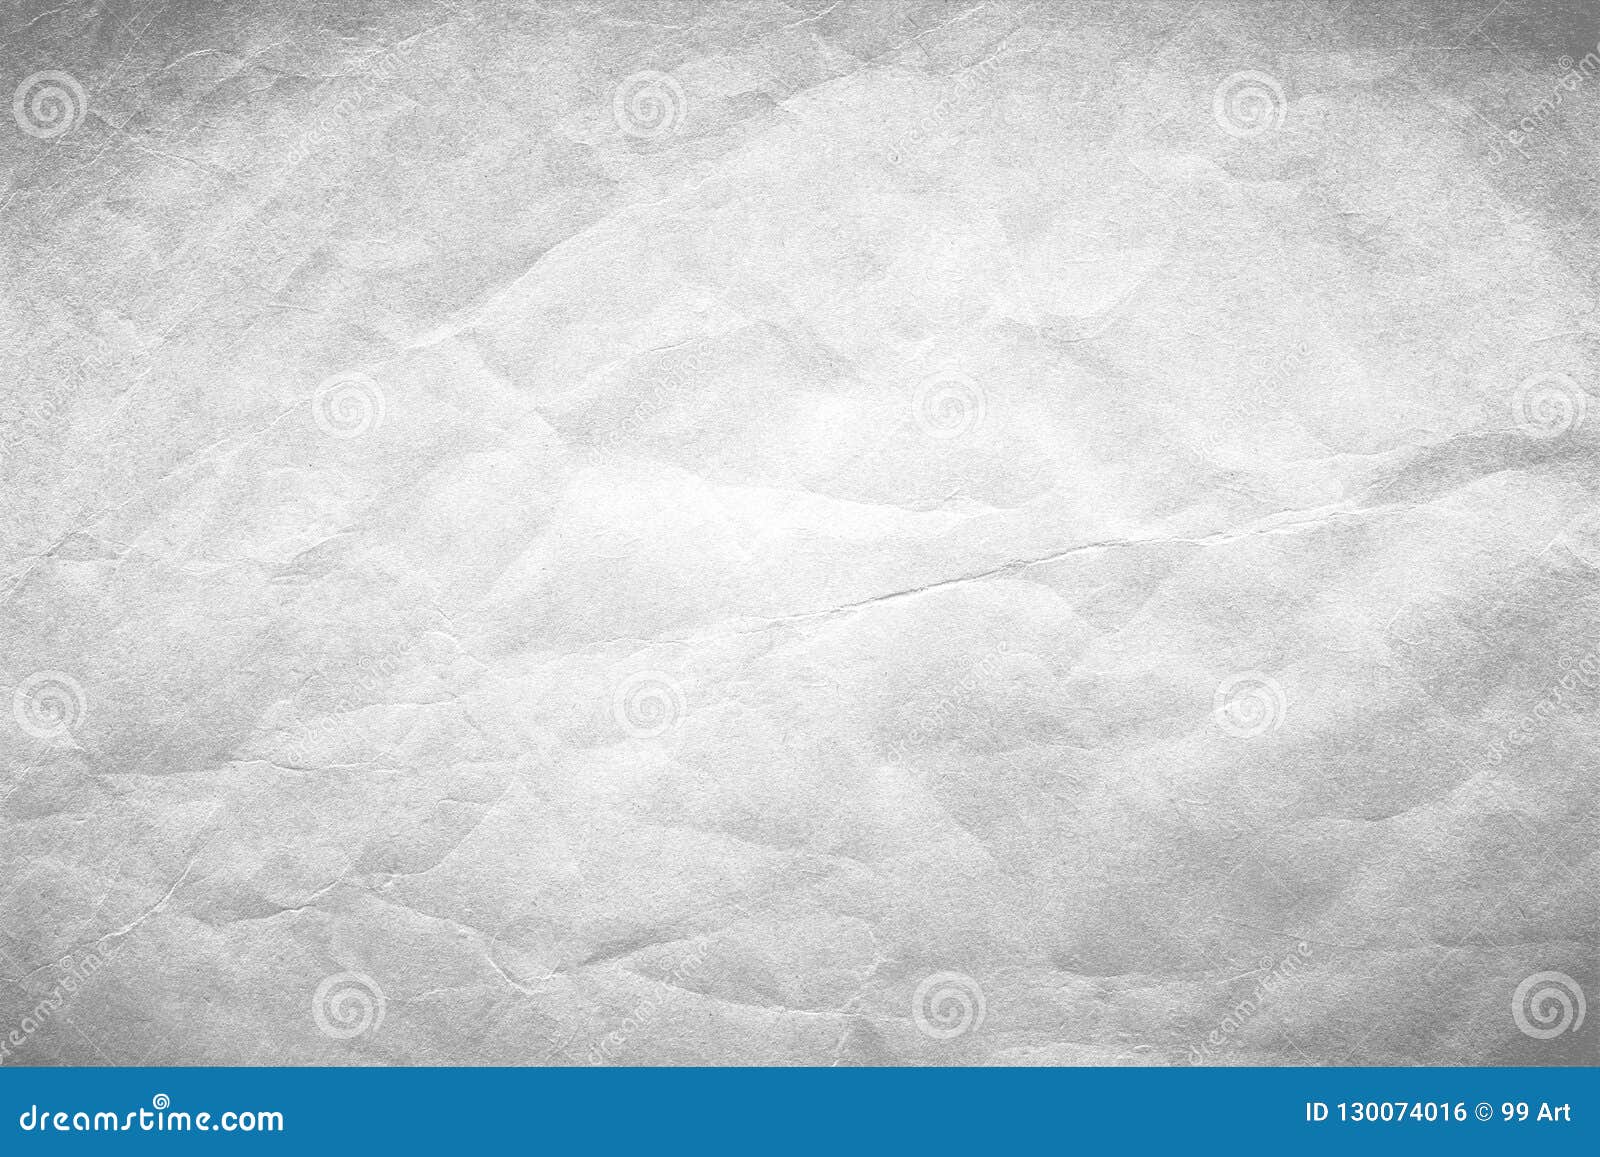 White Old Paper Texture Vintage Paper Background Stock Photo